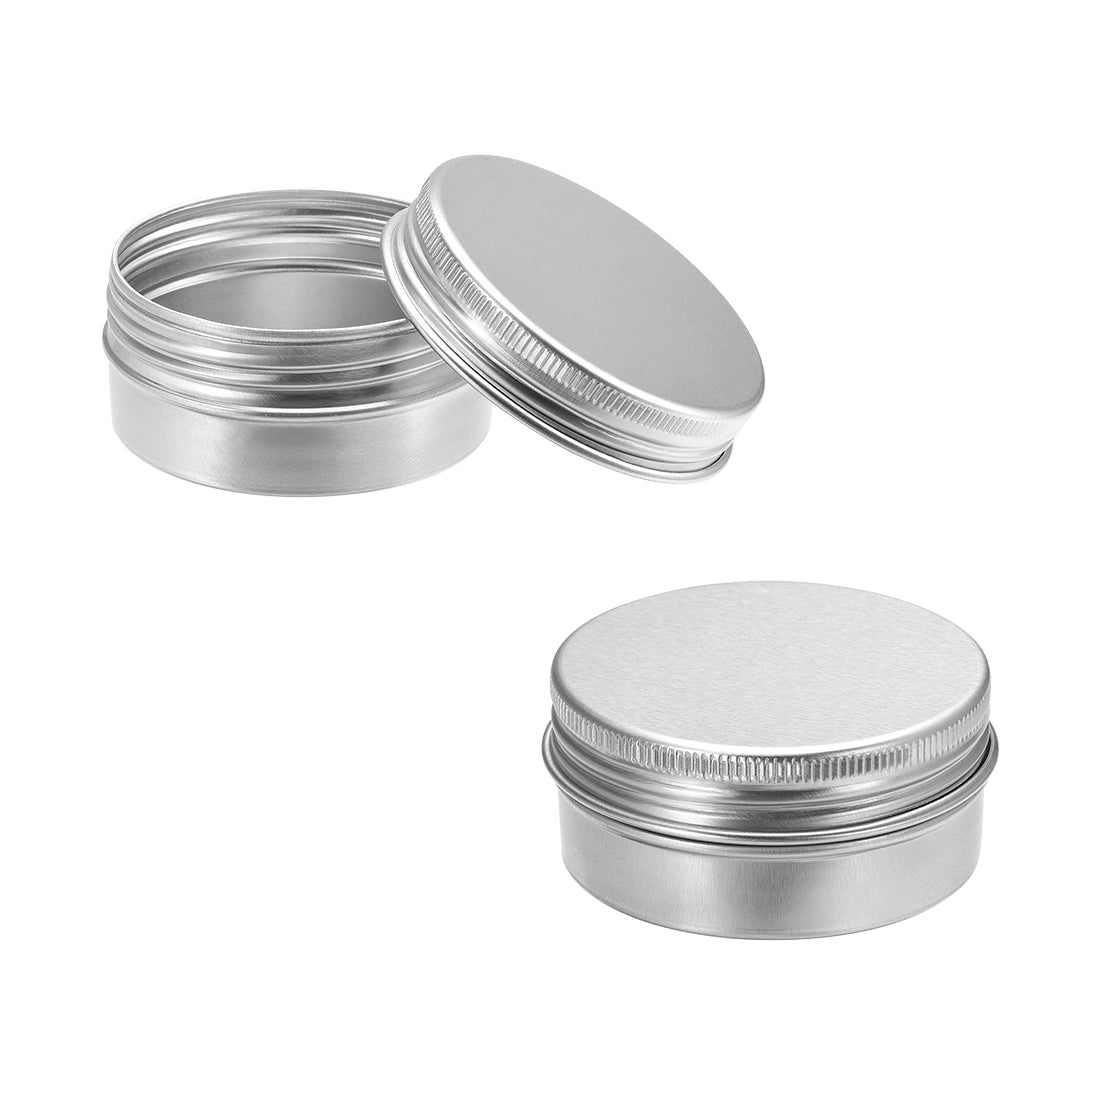 uxcell Uxcell 1.7 oz Round Aluminum Cans Tin Can Screw Top Metal Lid Containers 50ml, 6pcs